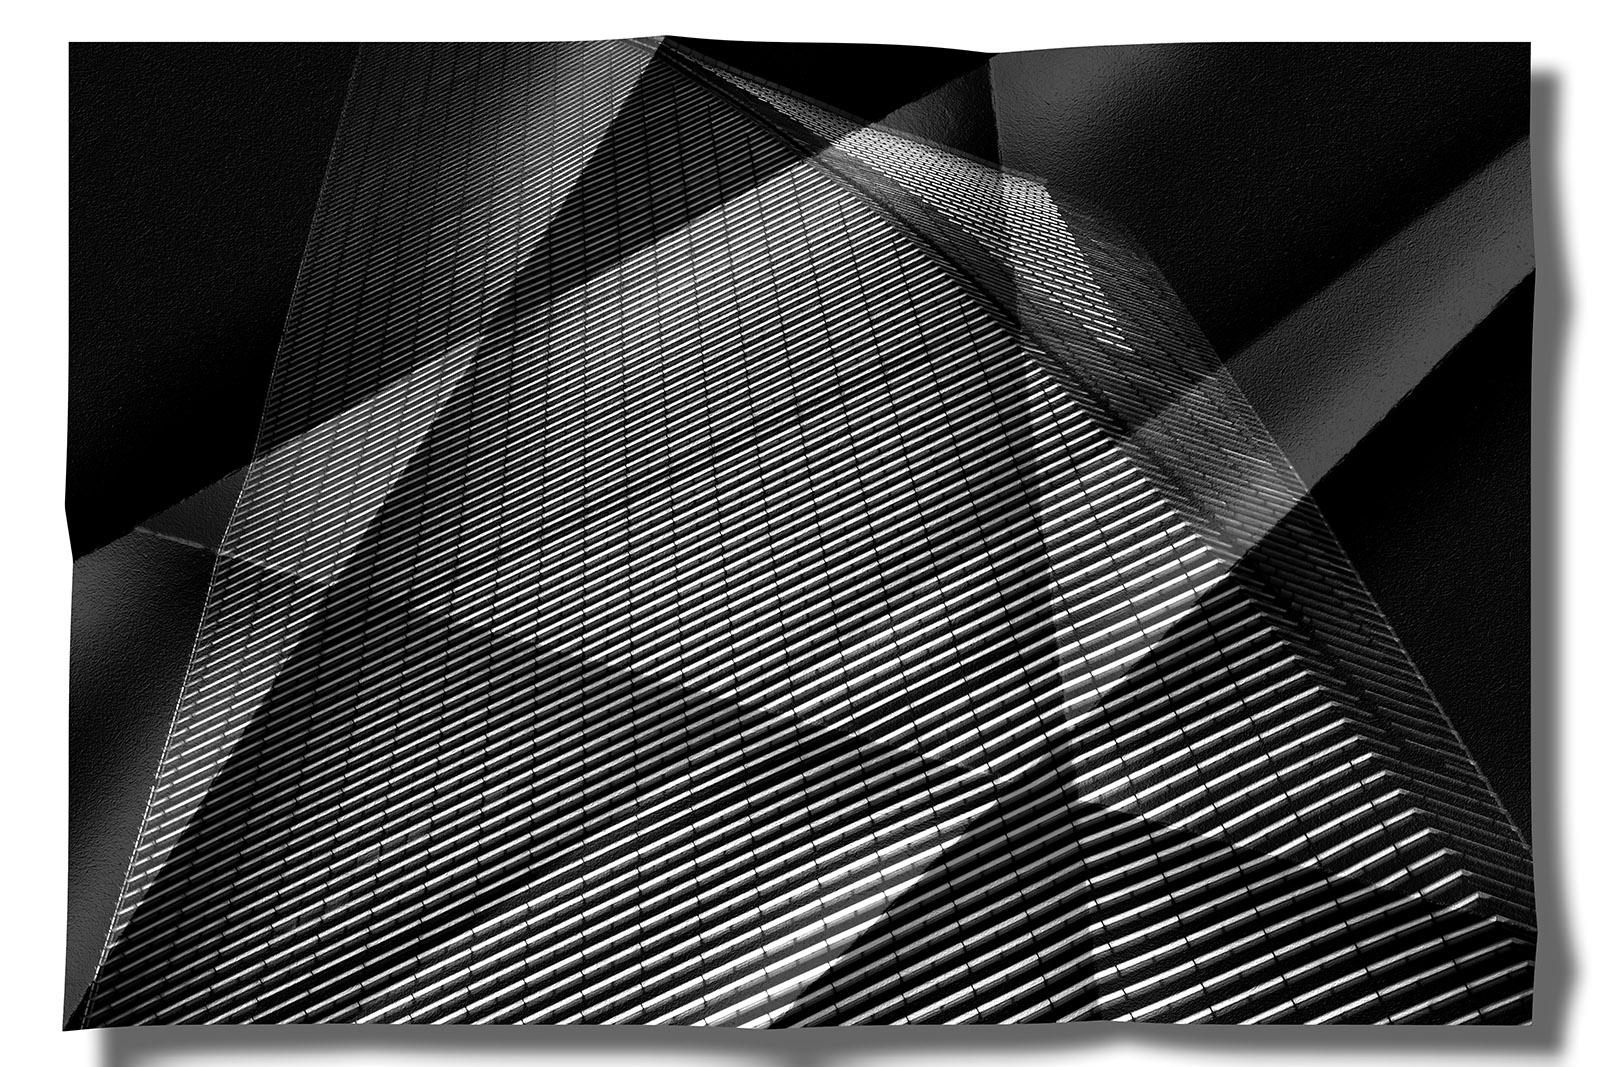 Architectonic 3- Signed limited edition print, Large contemporary, Architecture - Black Black and White Photograph by Michael Banks